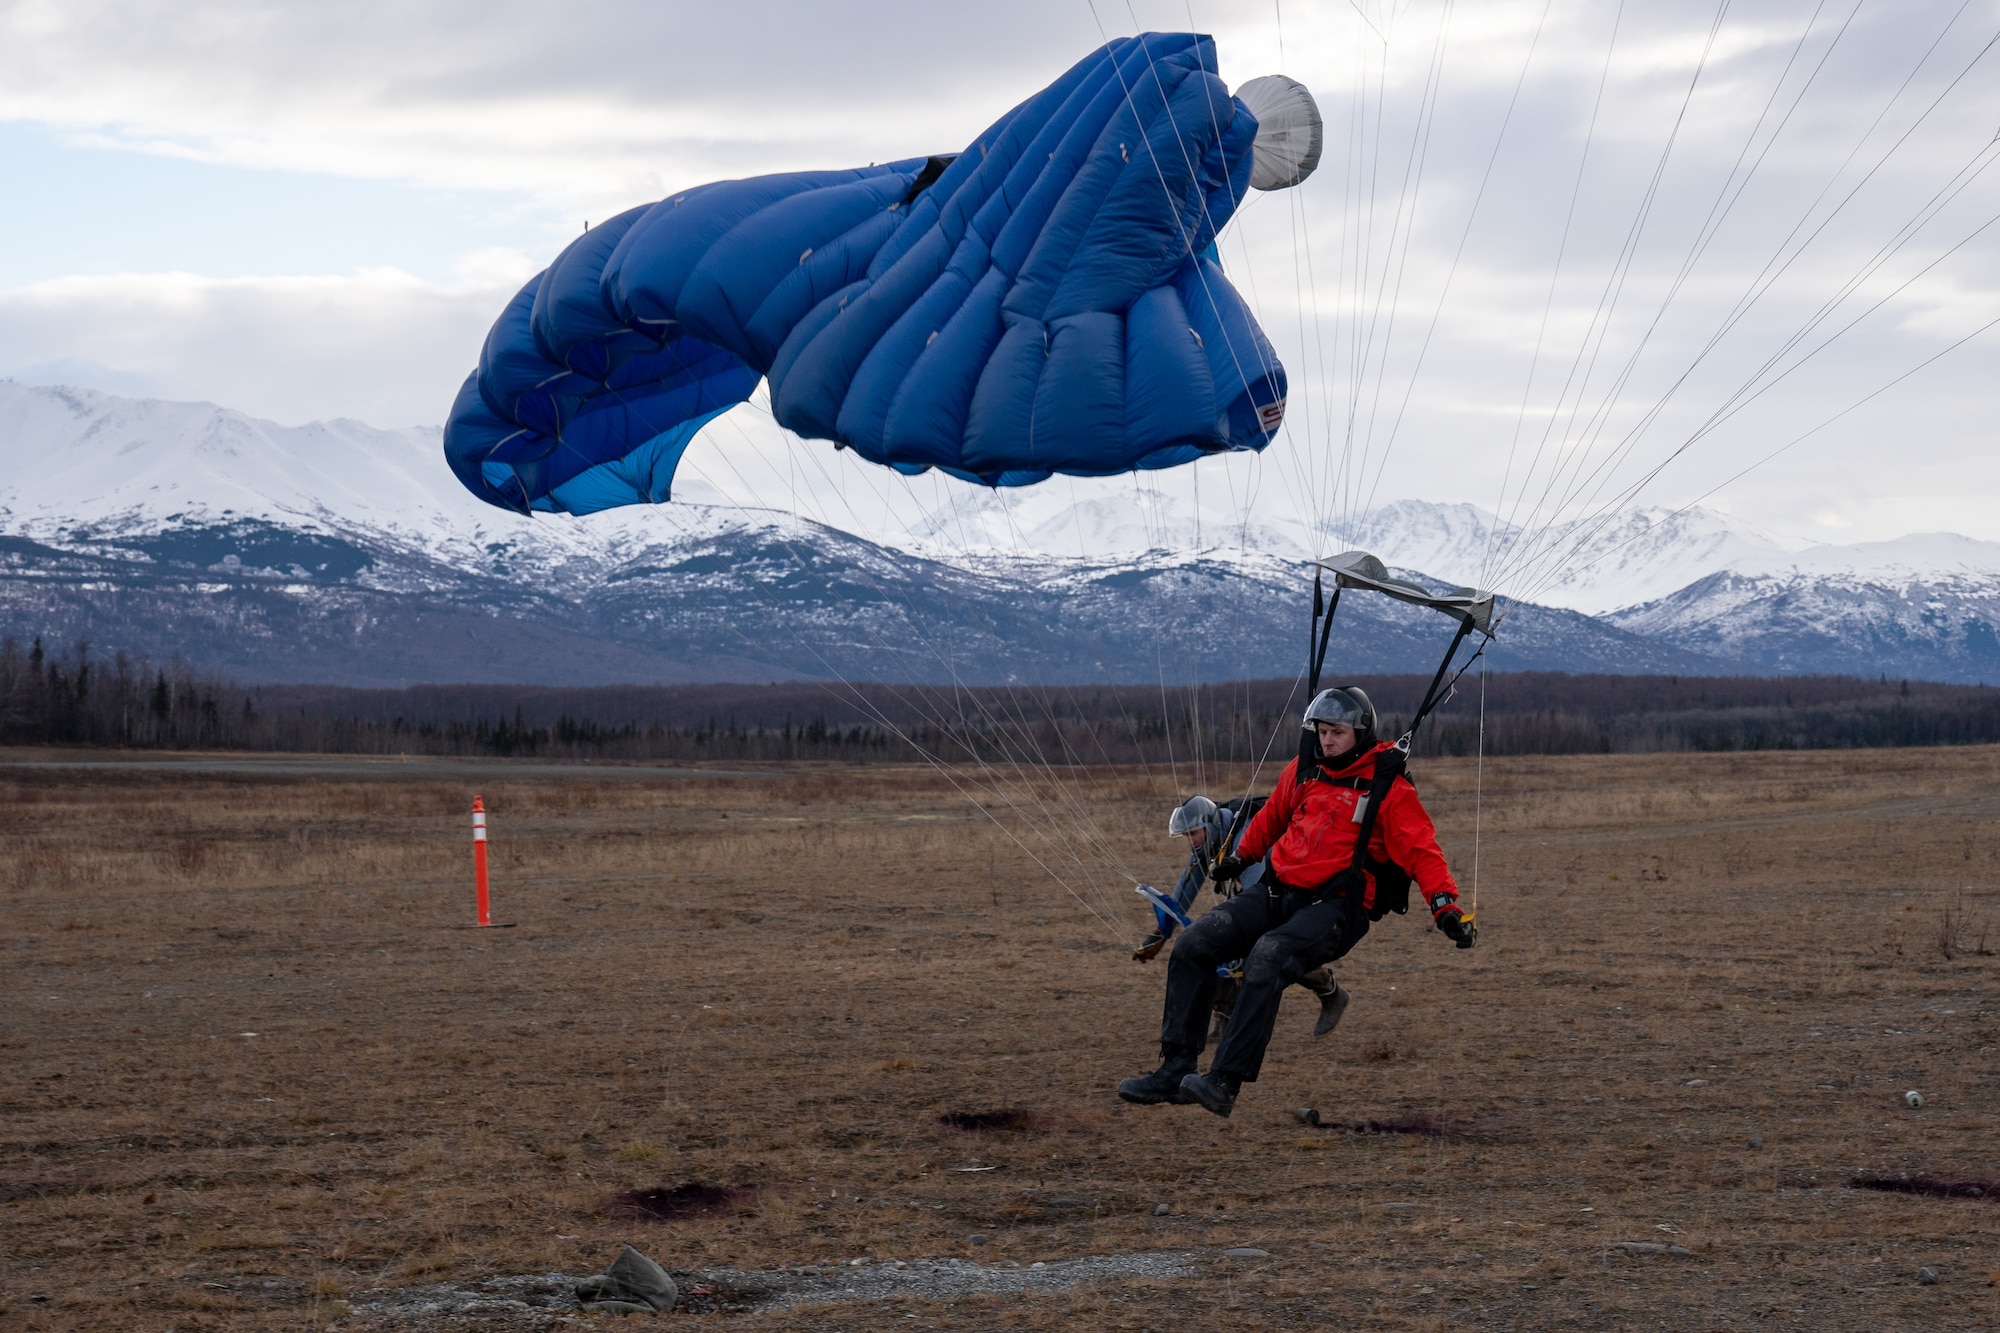 U.S. Air Force Master Sgt. Chris Bowerfind glides past Master Sgt. Nick Watson, both pararescuemen assigned to the 212th Rescue Squadron, Alaska Air National Guard, to land directly on target during a training event at Joint Base Elmendorf-Richardson.